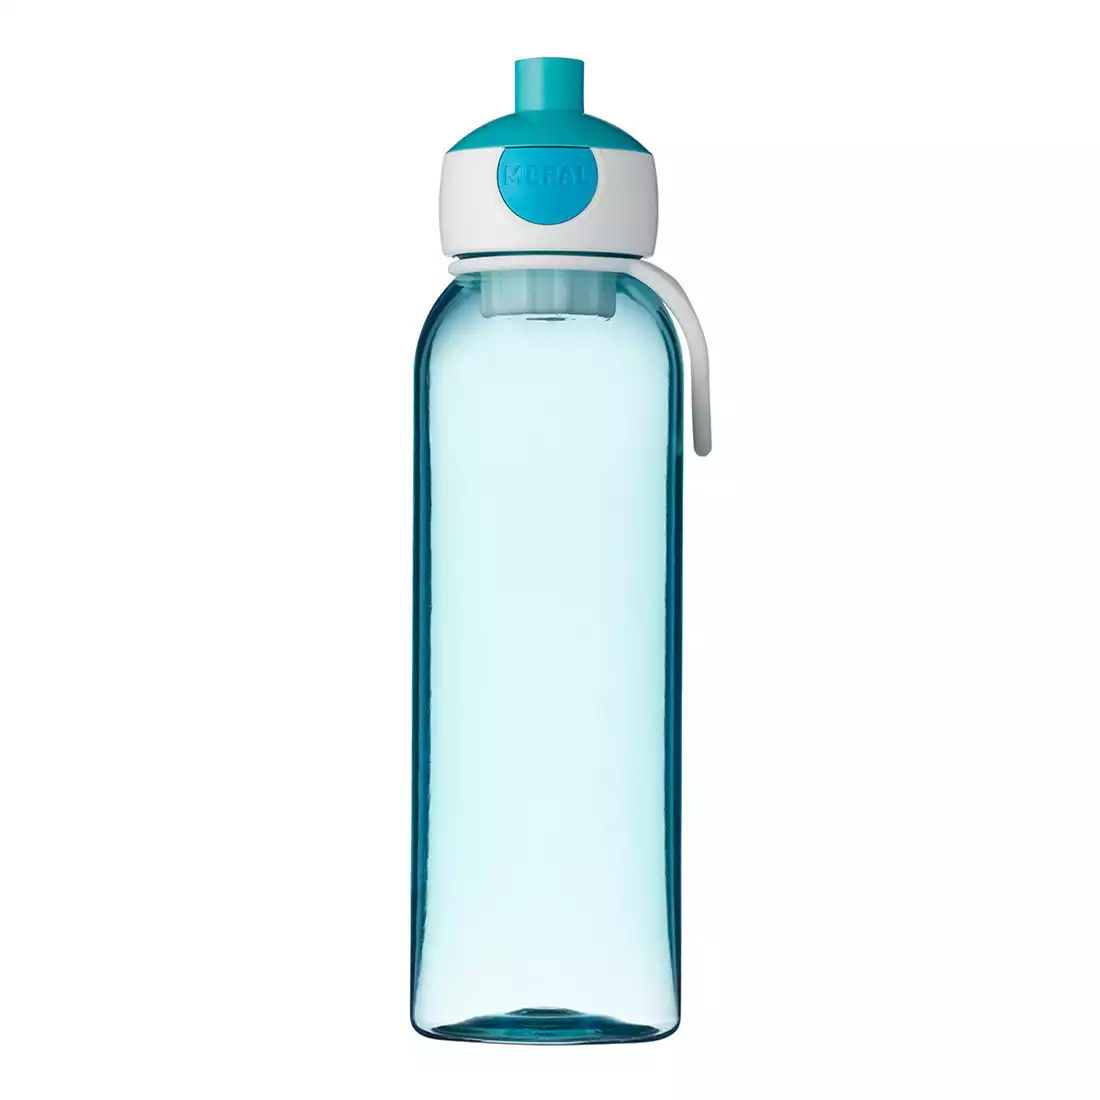 MEPAL CAMPUS water bottle 500ml, turquoise